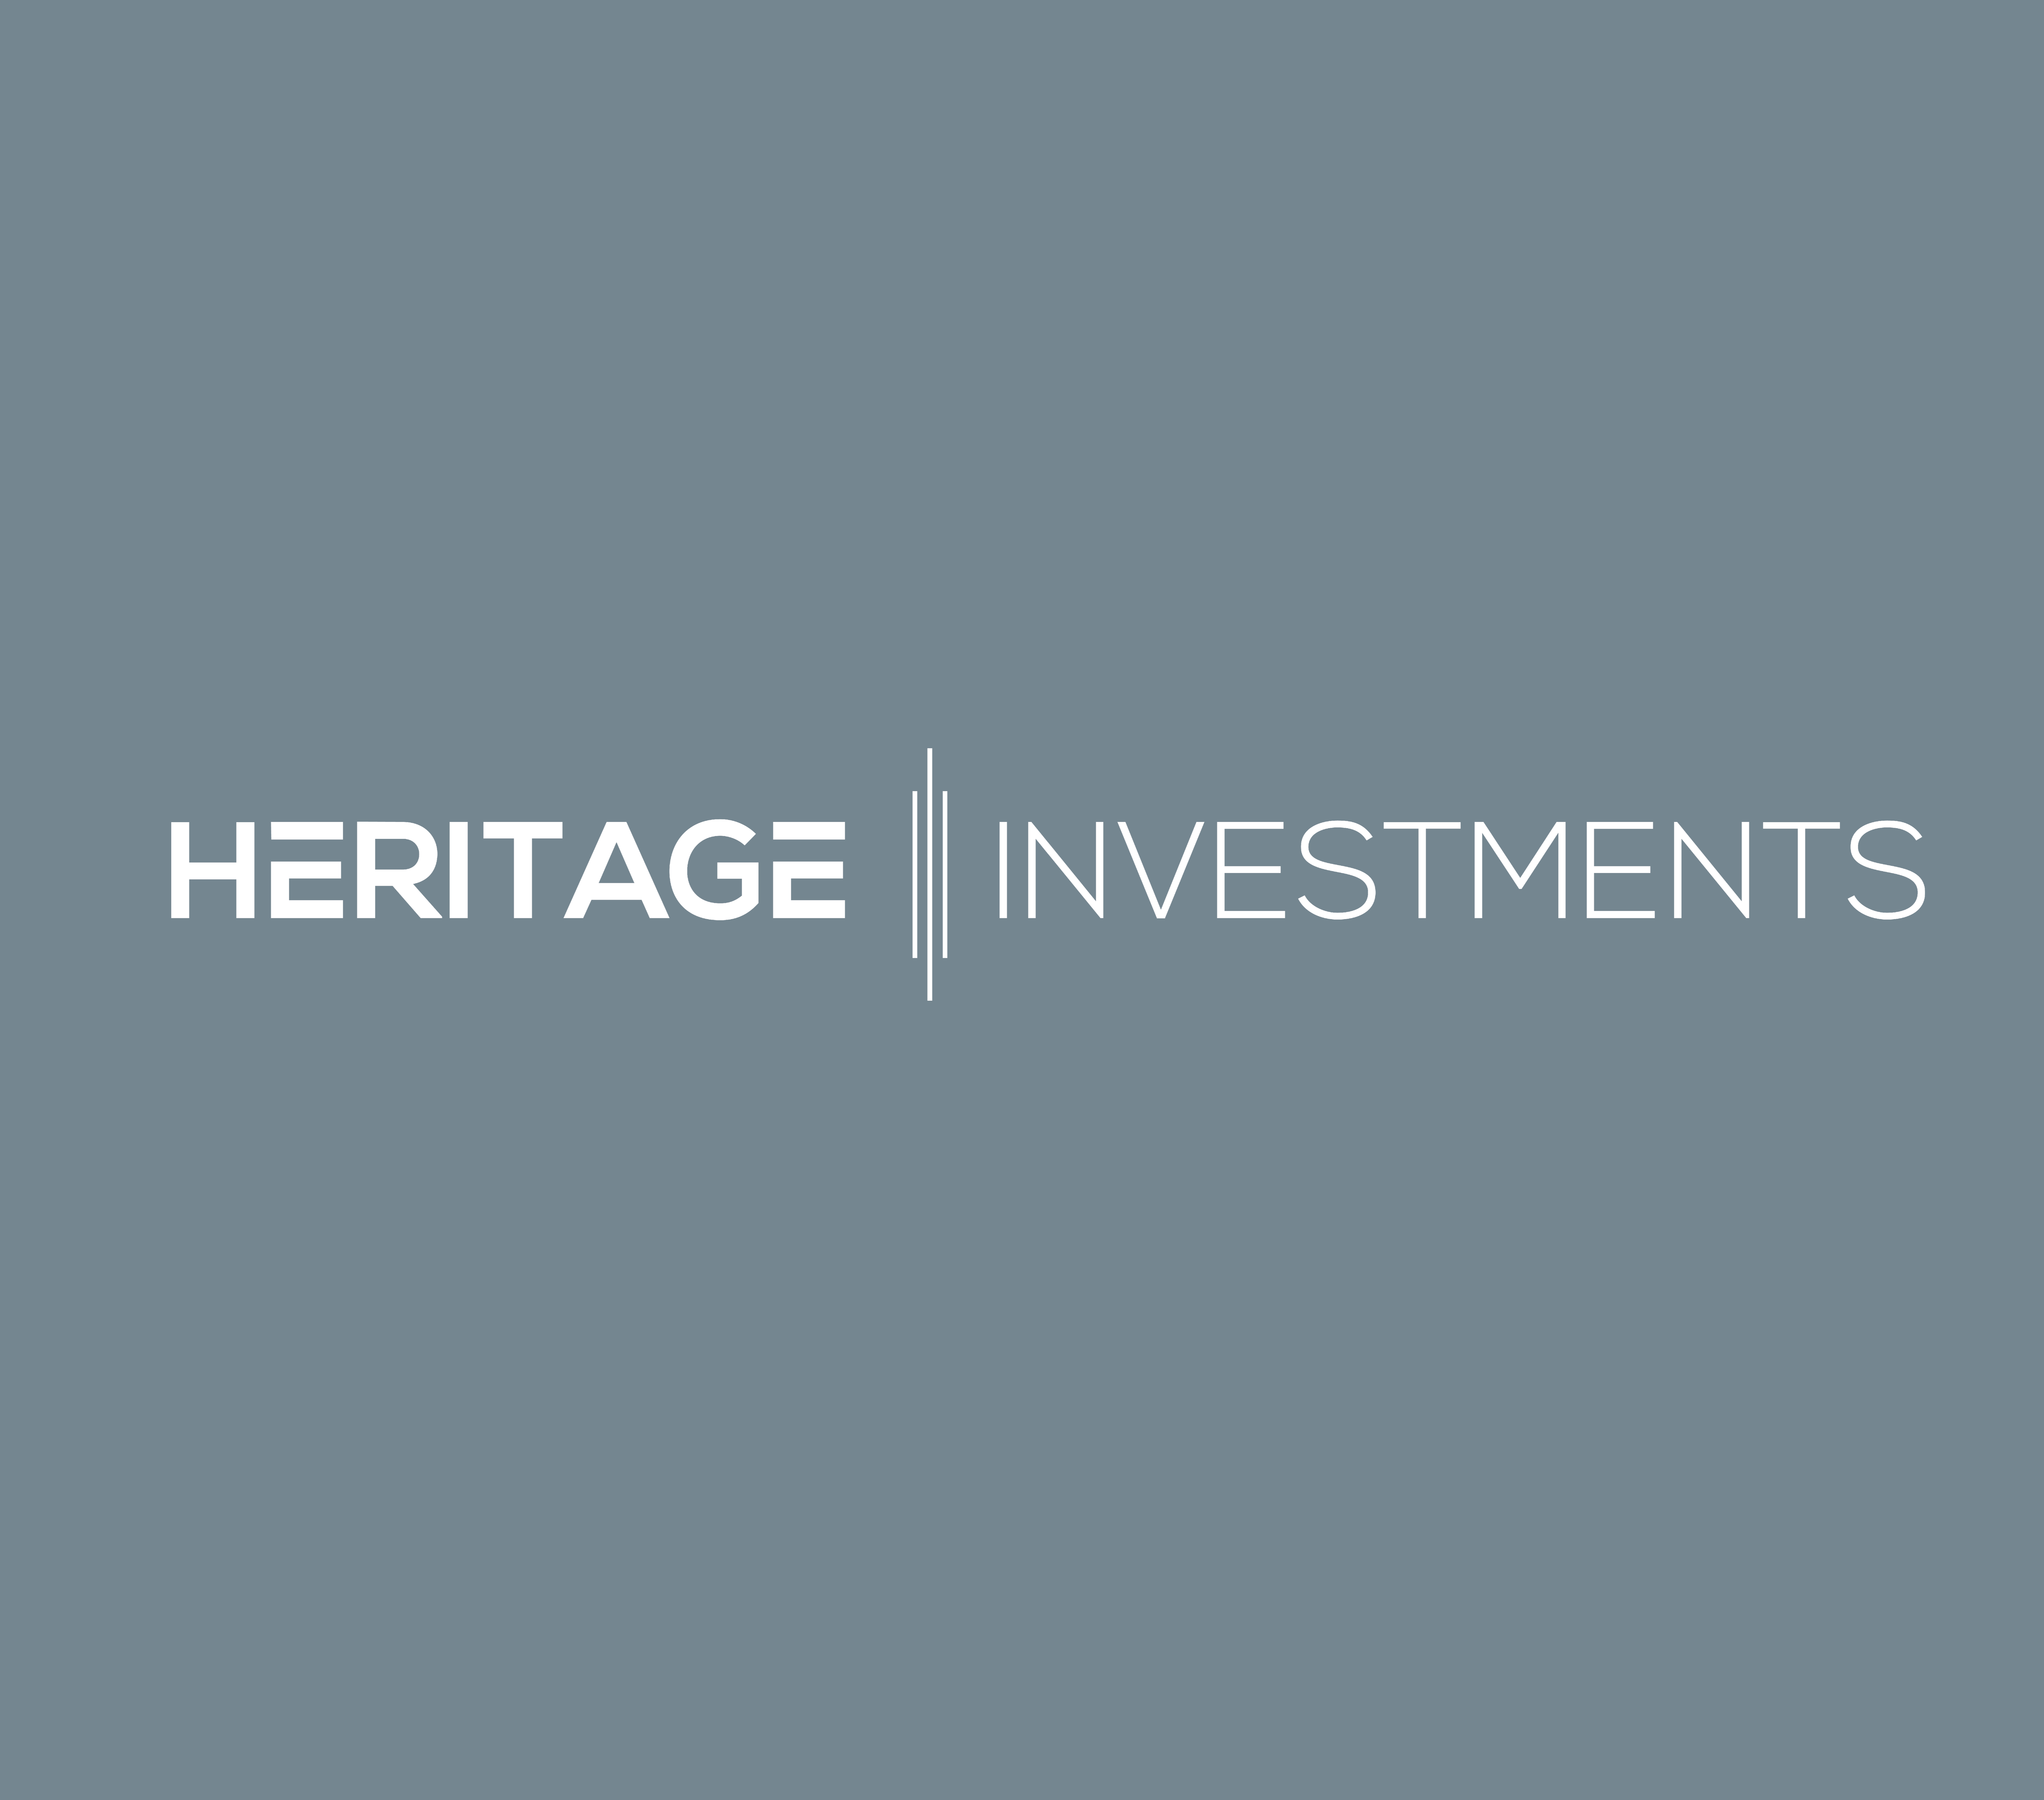 Heritage Investments